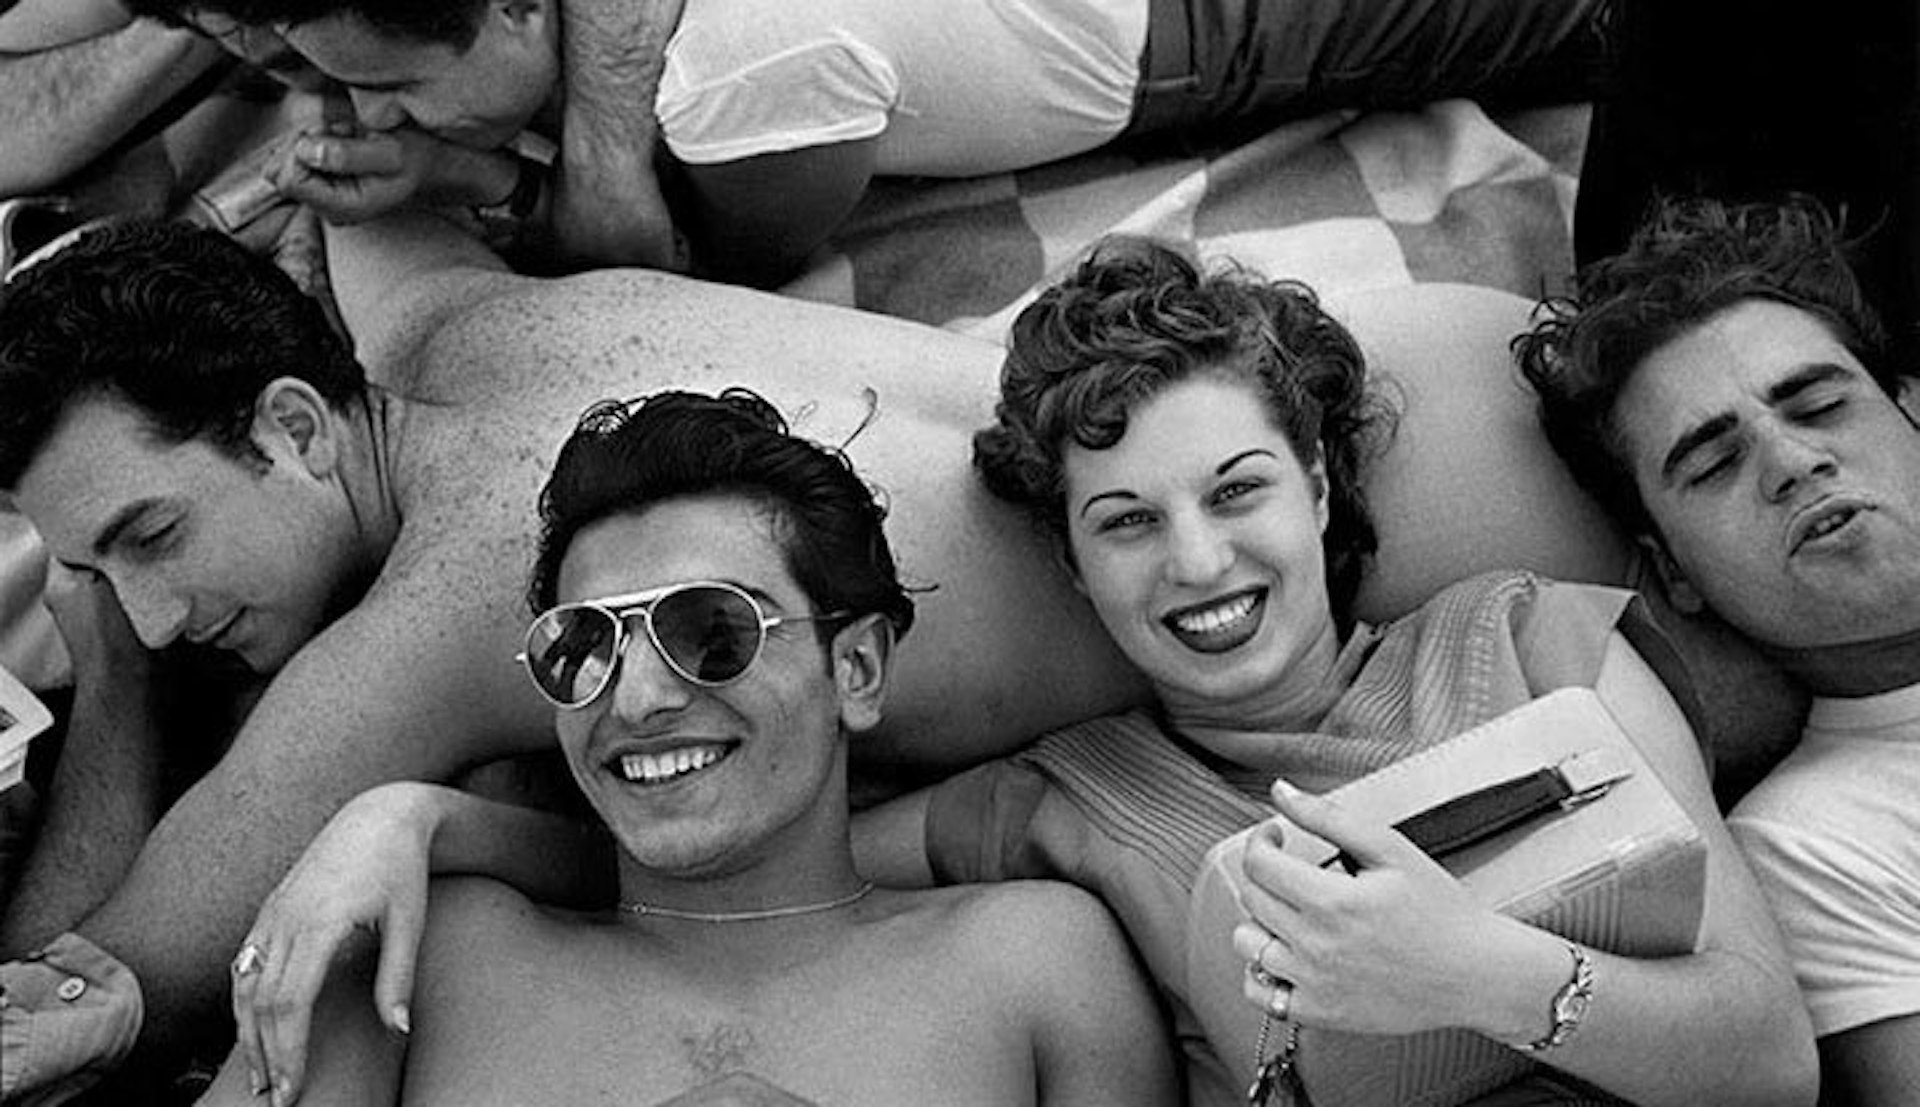 Touring Coney Island with NYC photographer Harold Feinstein